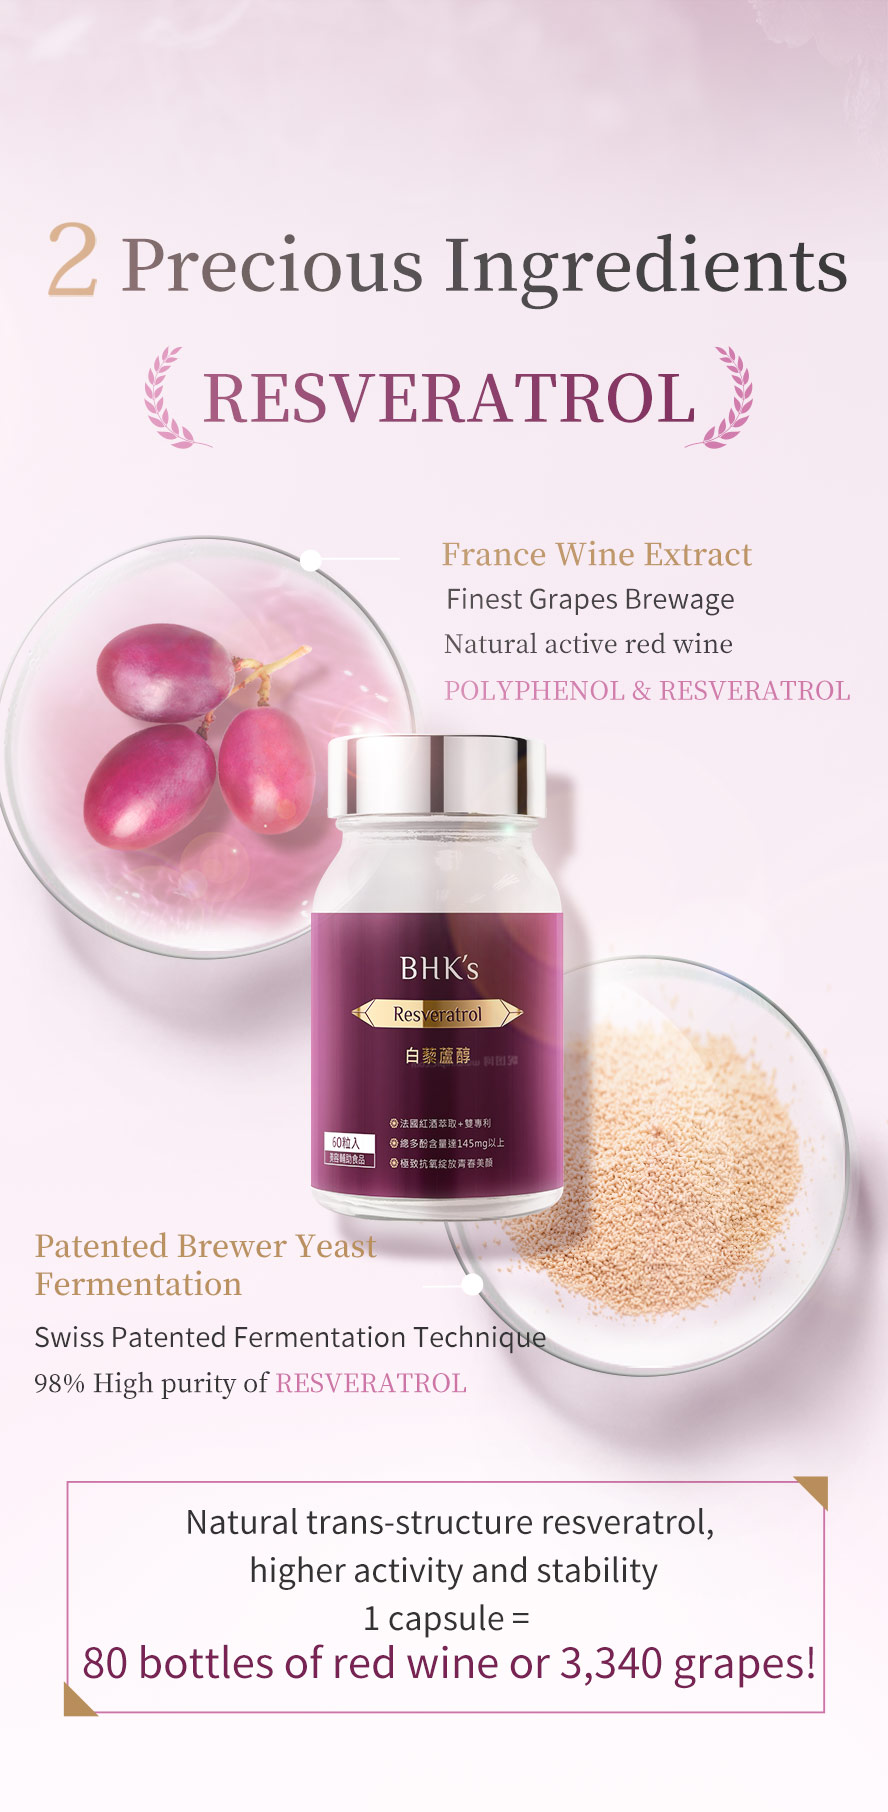 BHK's Resveratrol contains france wine extract and patented brewer yeast fermentation which rich in resveratrol to support healthy aging.